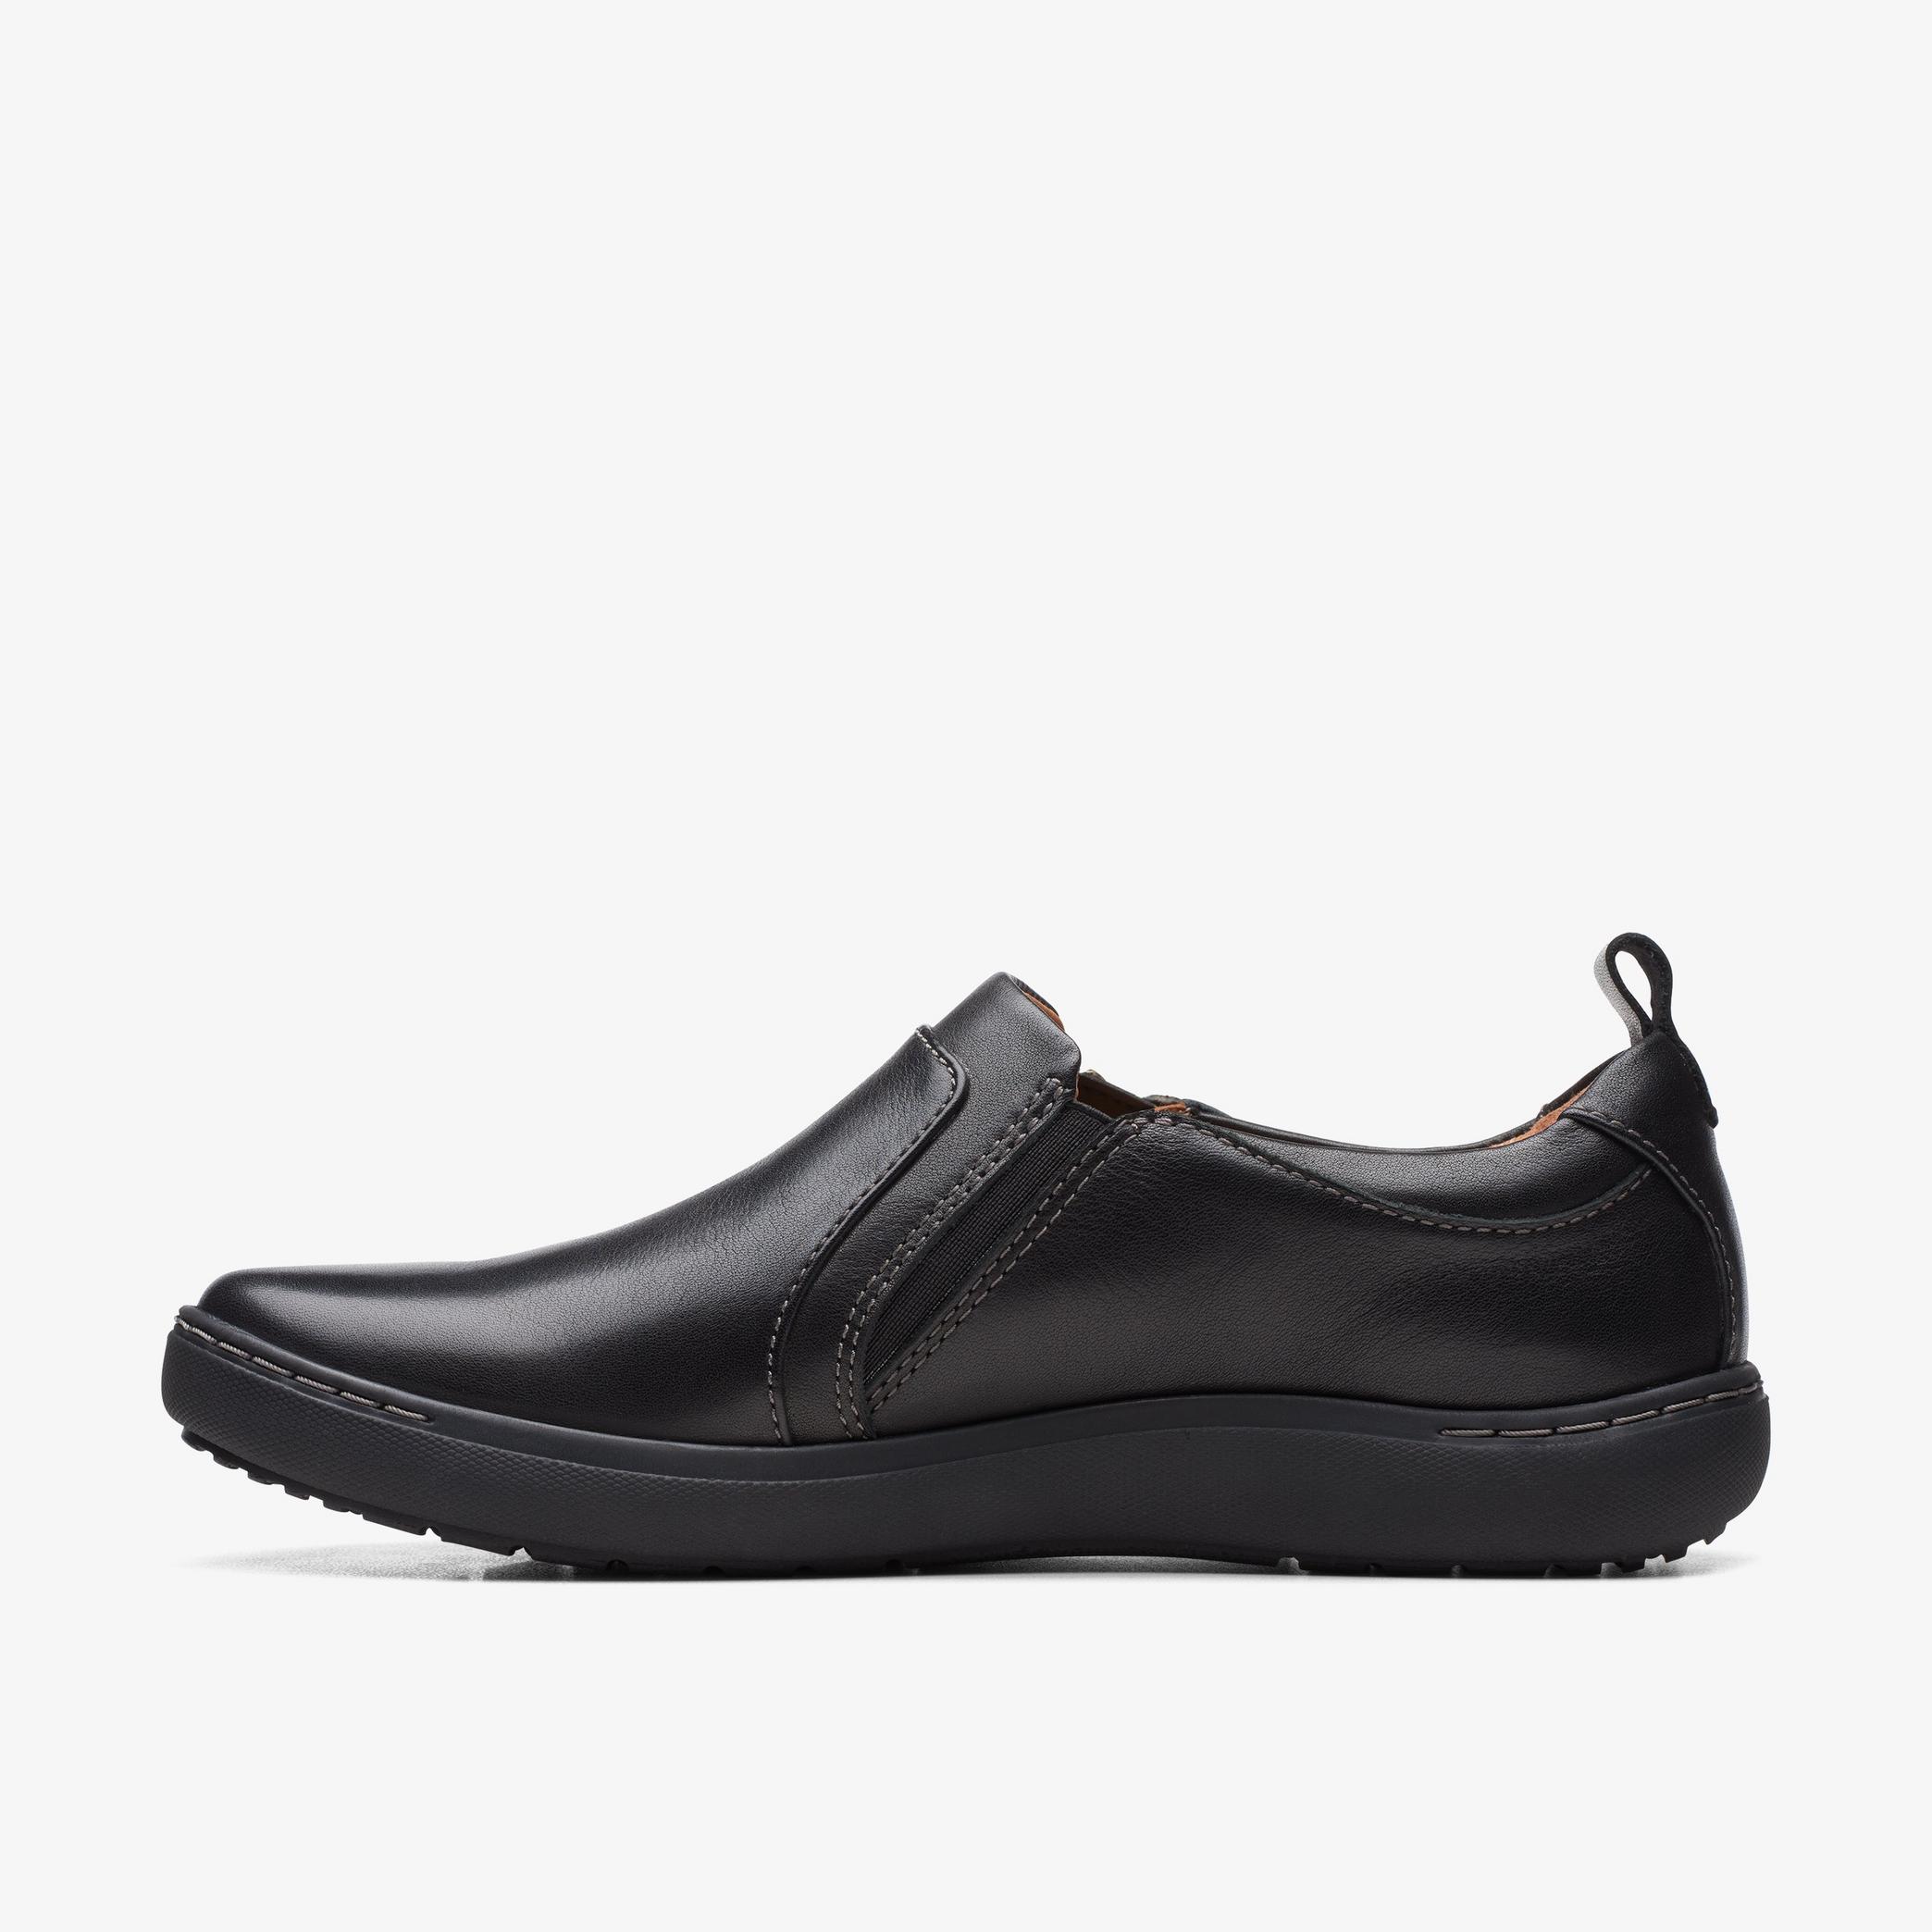 Nalle Lilac Black Leather Slip Ons, view 2 of 6